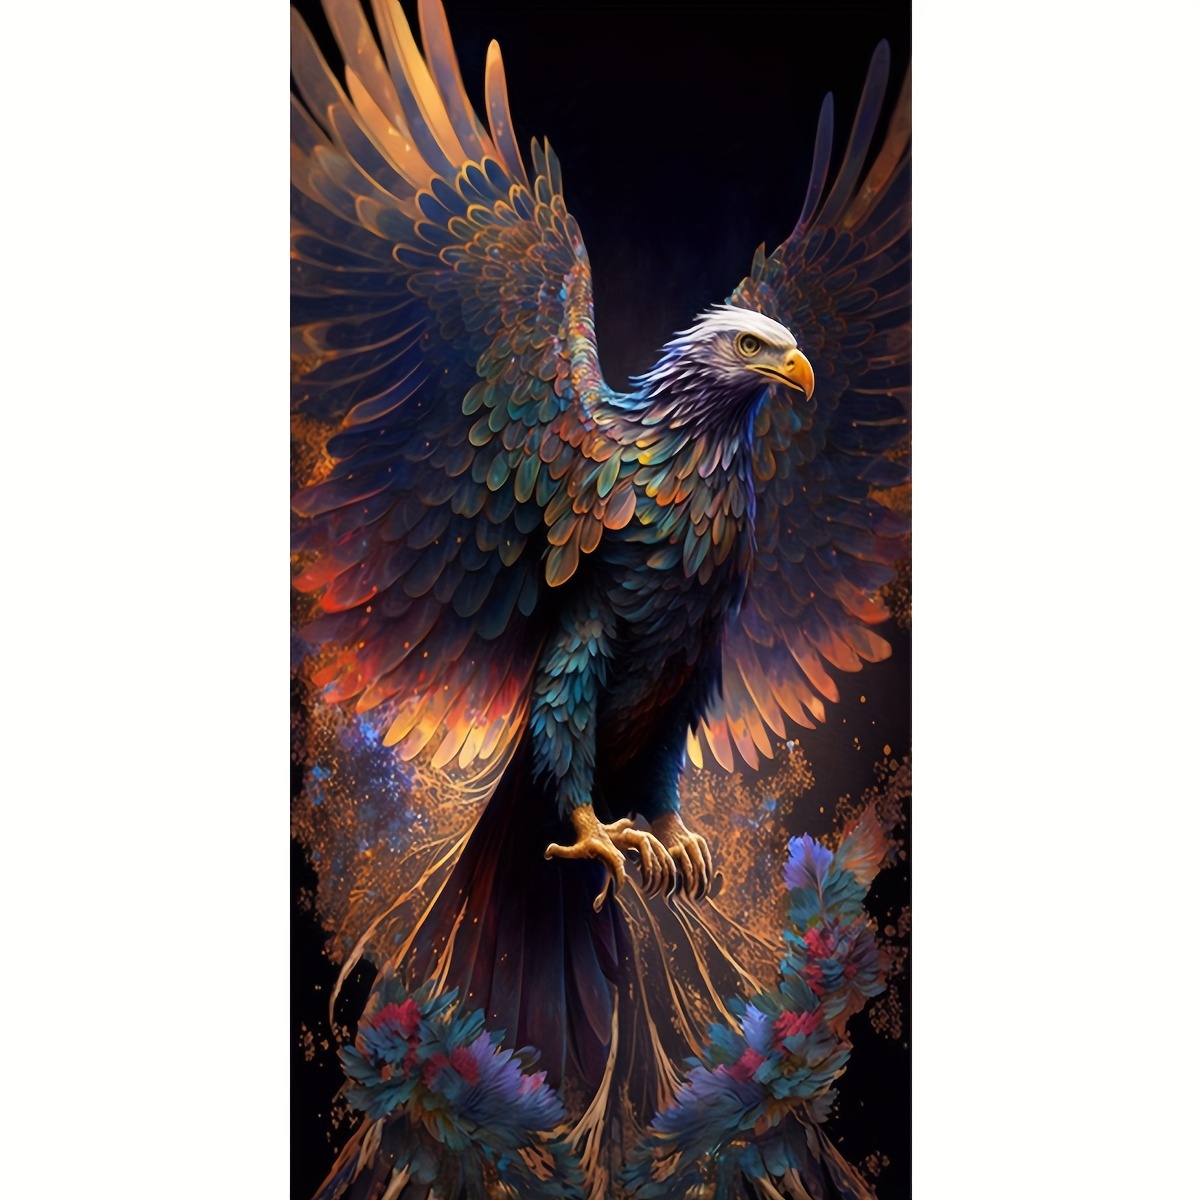 1pc large size eagle pattern diamond art painting kit 5d diy mosaic round diamond coating water drill art painting holiday gift handmade craft production suitable for home wall decoration art frameless 50x100cm 19 7x39 4inch